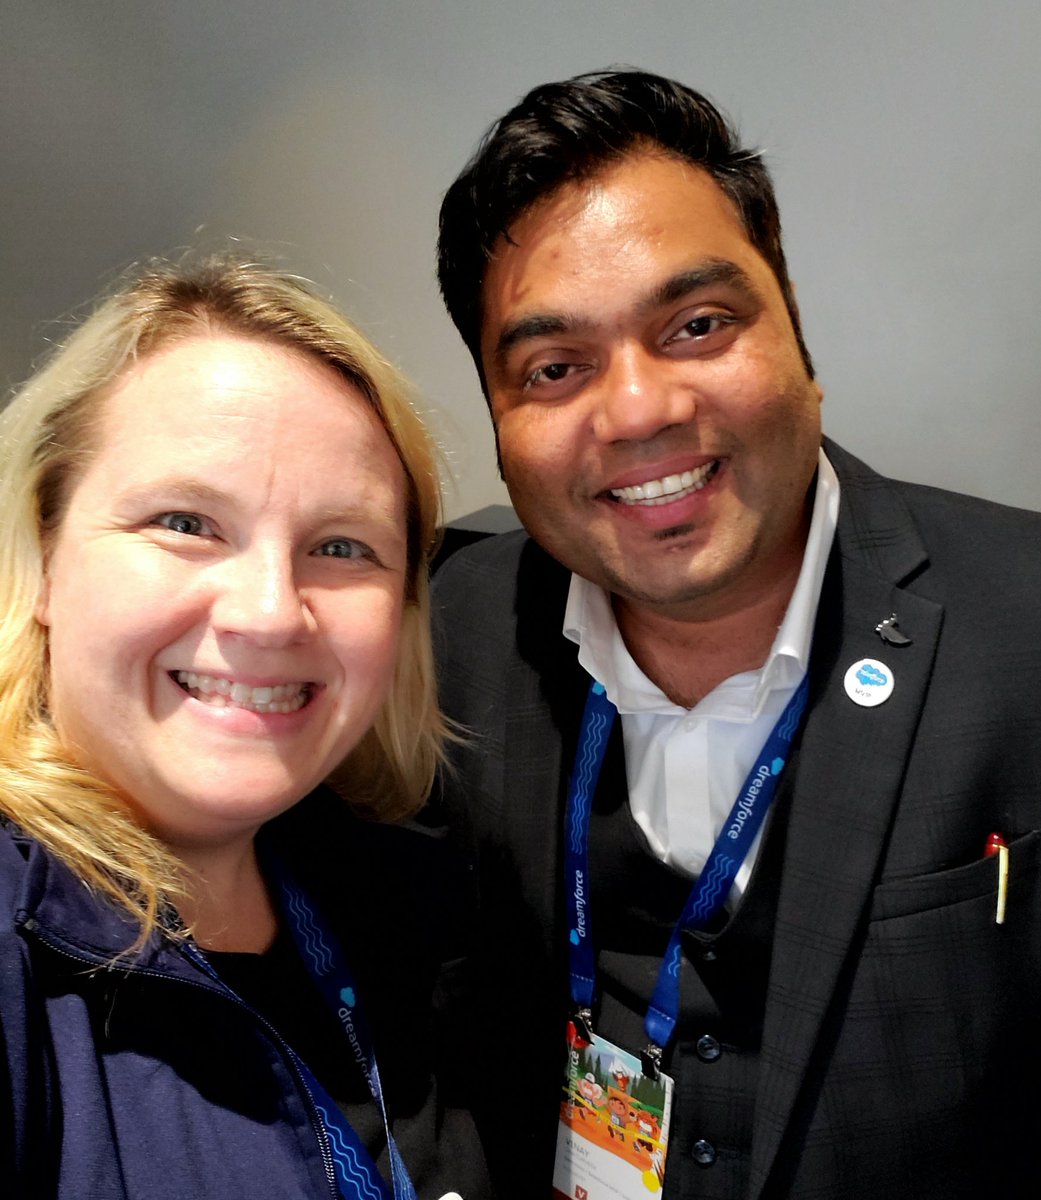 Finally caught up with @Vinayforce! #df19 #donebettertogether =)